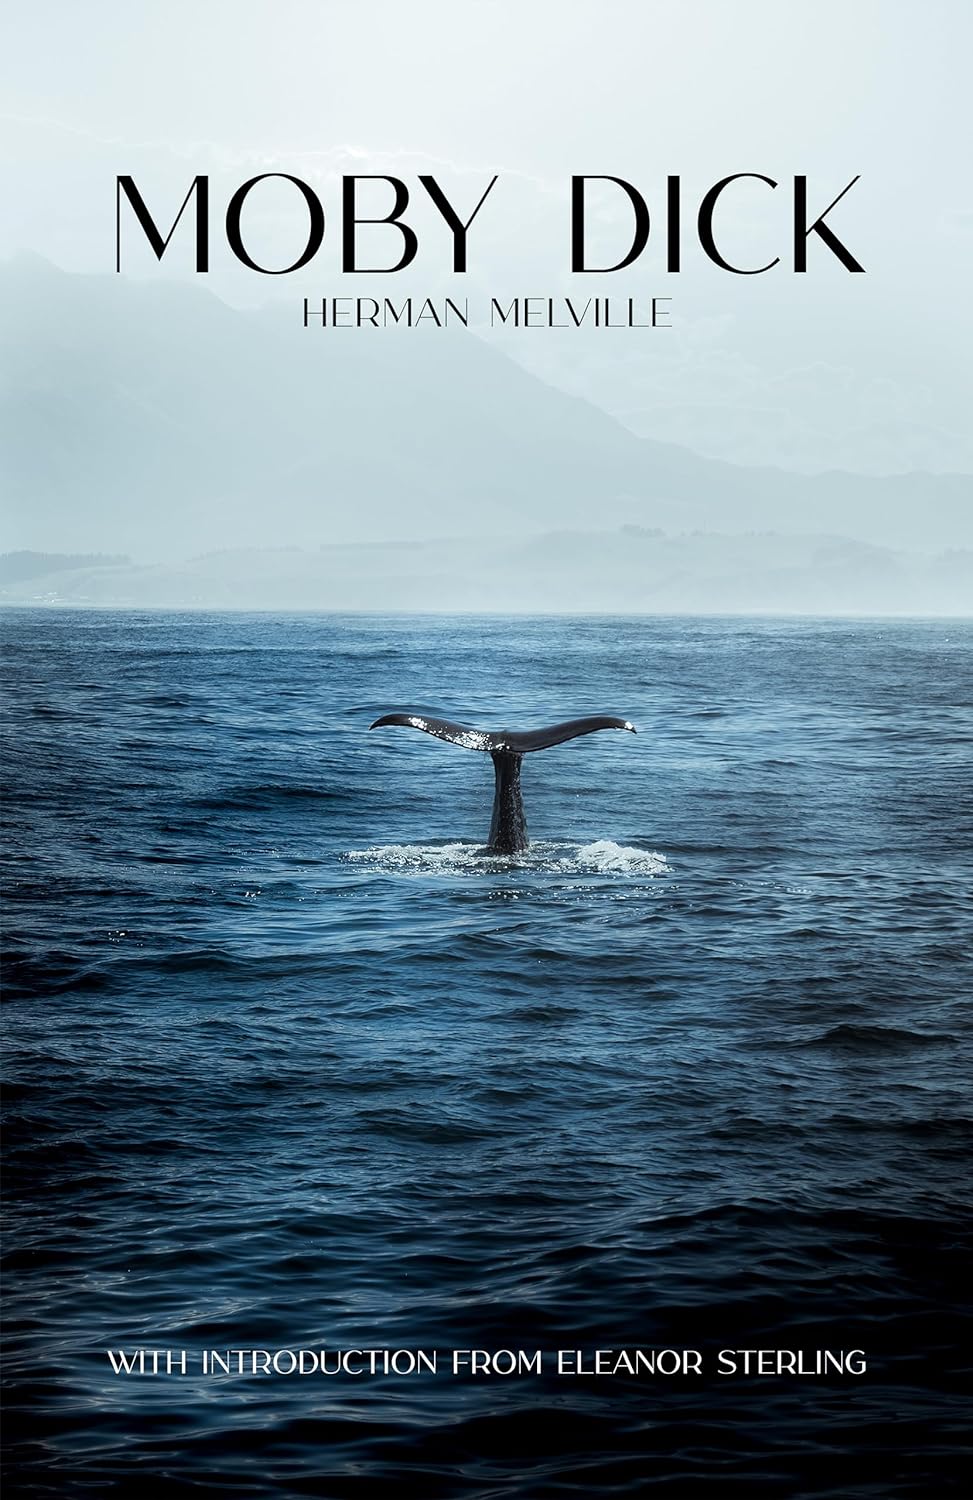 Moby Dick: The Epic Tale of Obsession and the Unconquerable Sea Kindle Edition FREE @ Amazon